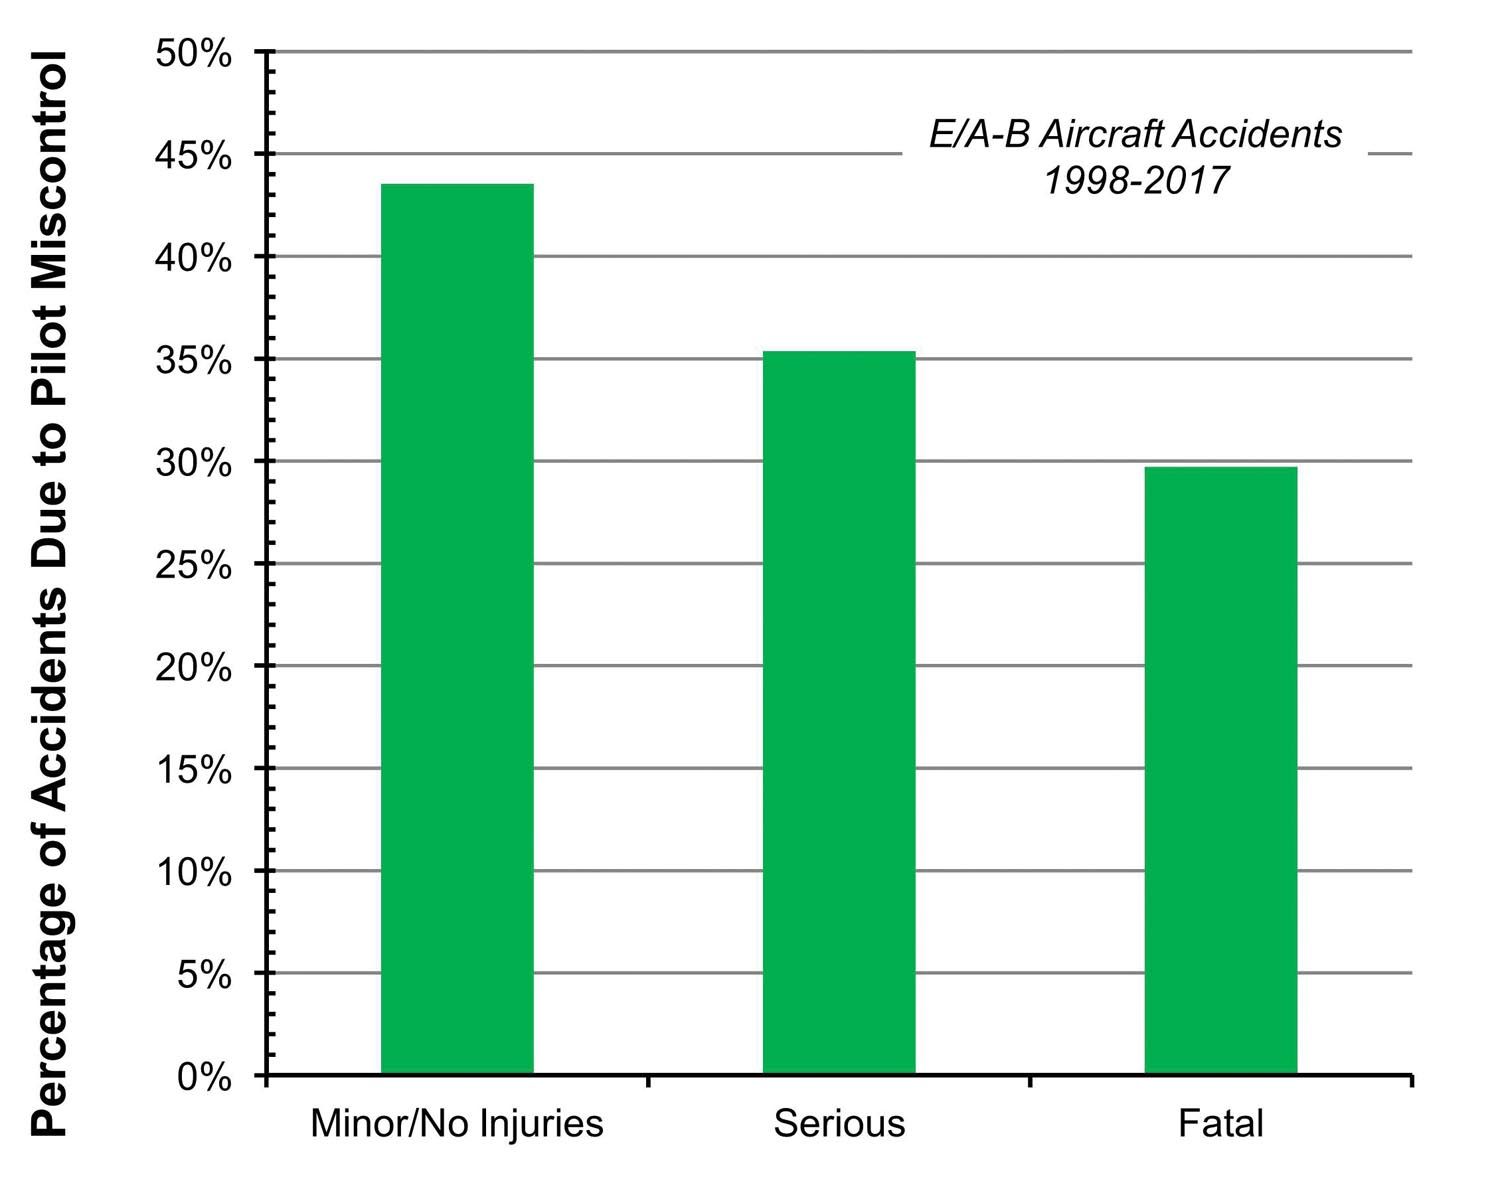 Figure 1: Pilot miscontrol rate vs. severity of injuries.